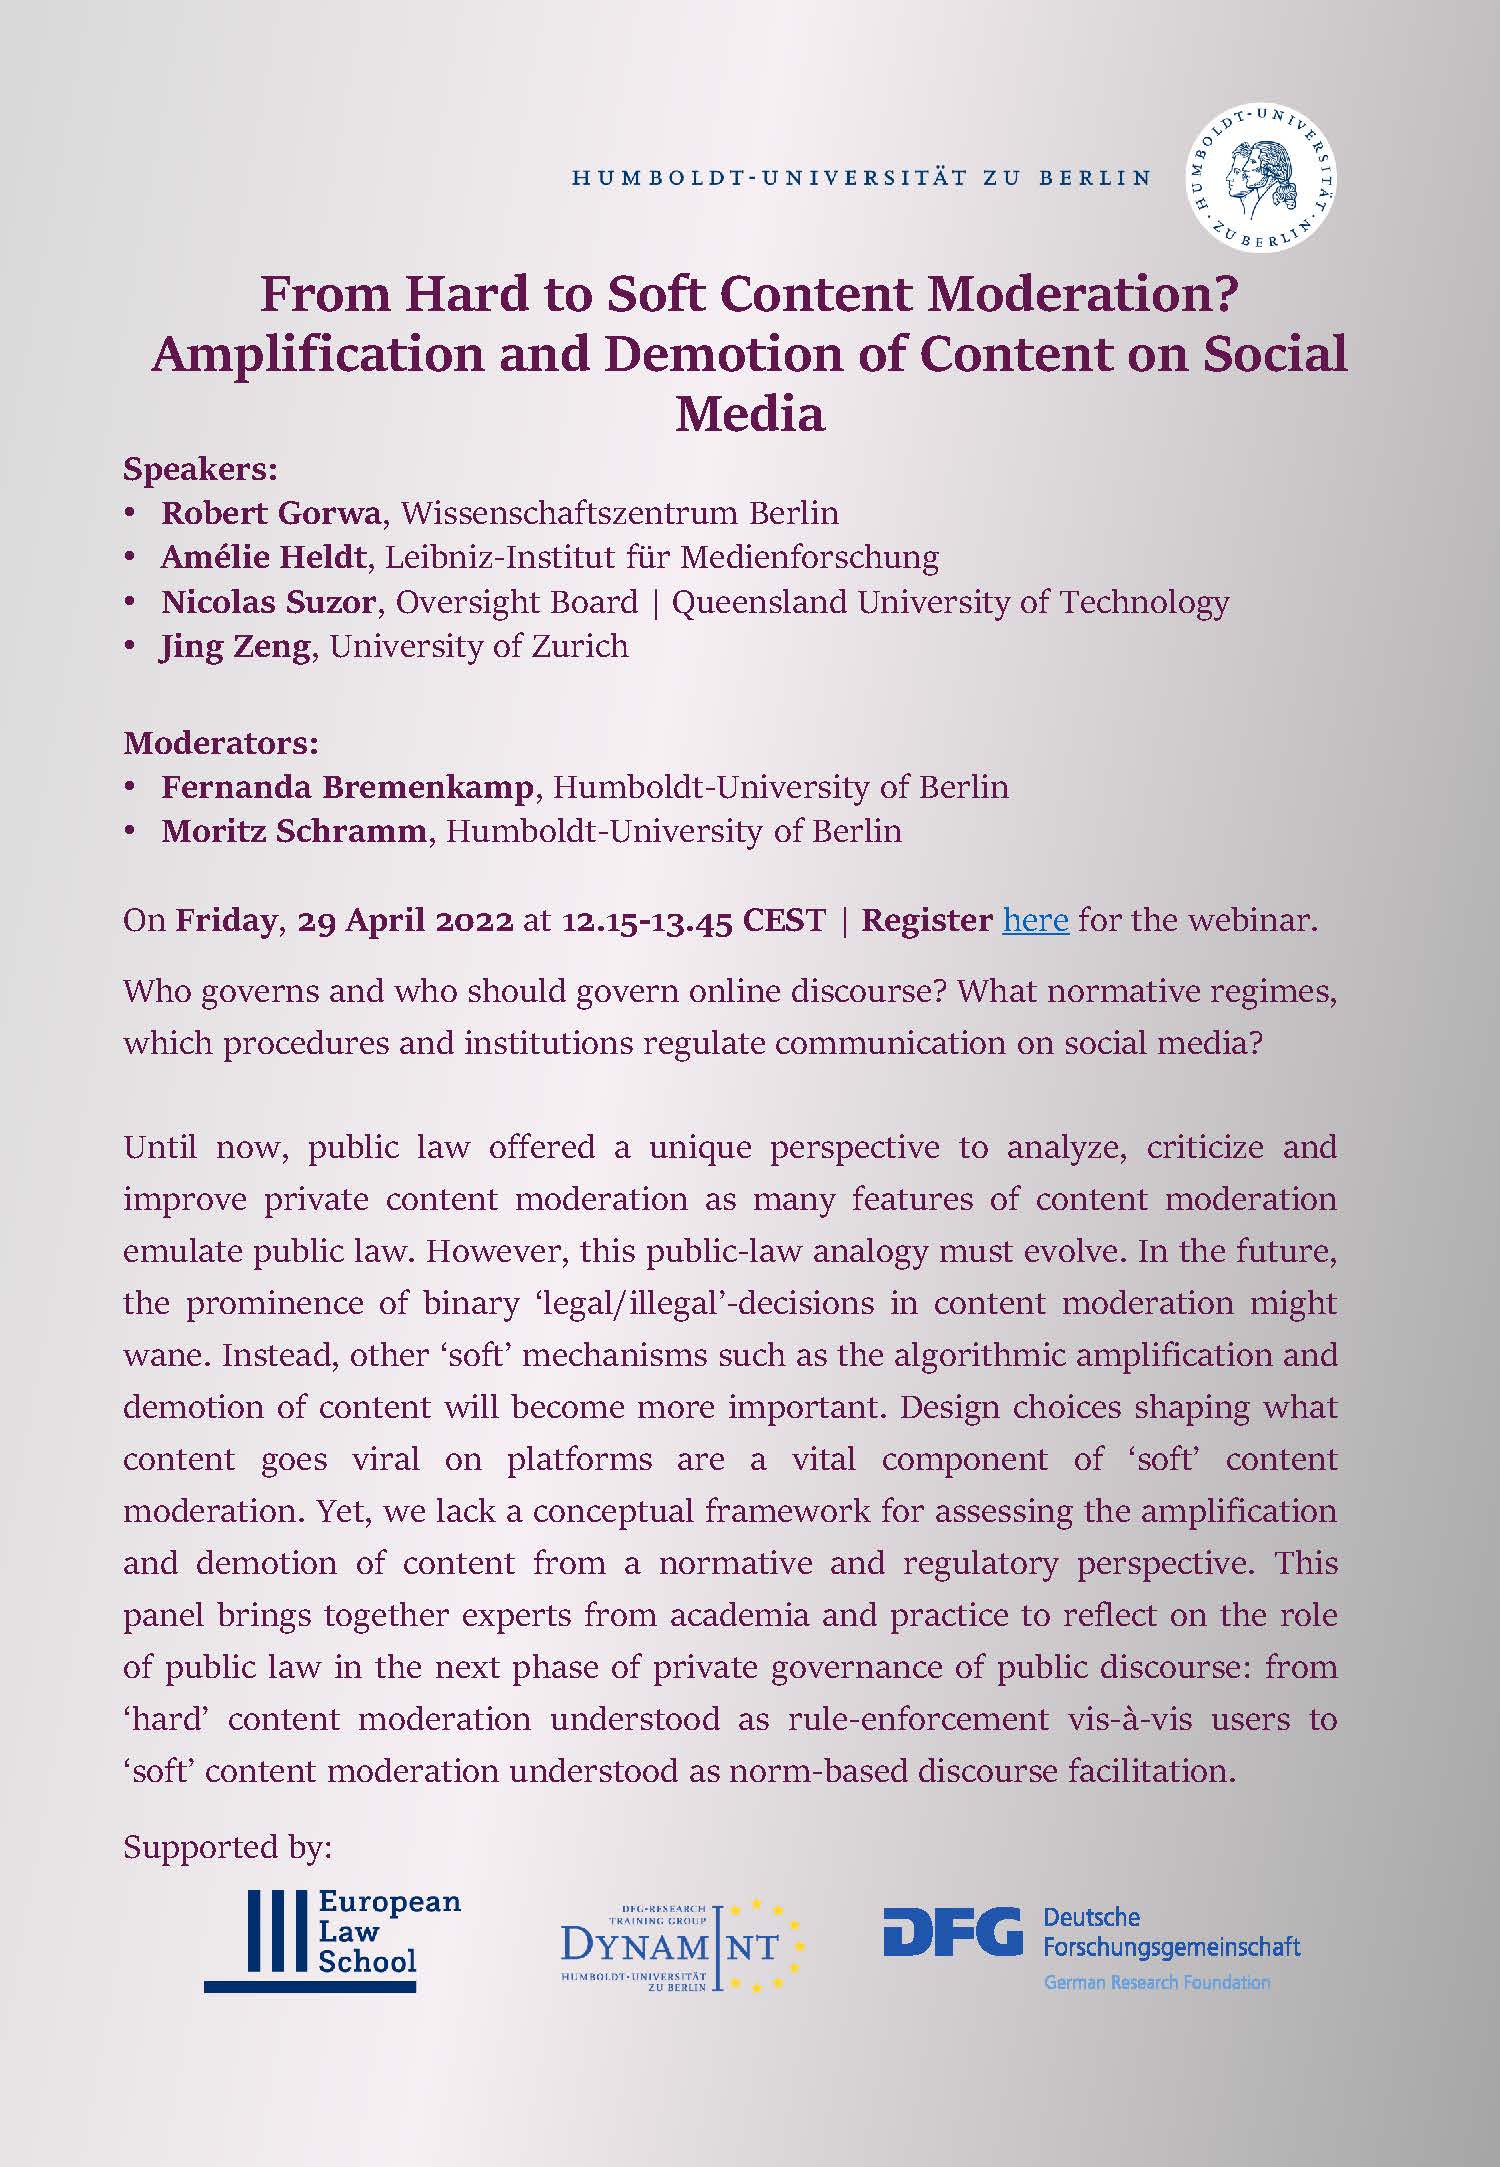 From Hard to Soft Content Moderation_Webinar_042922-FLYER.jpg